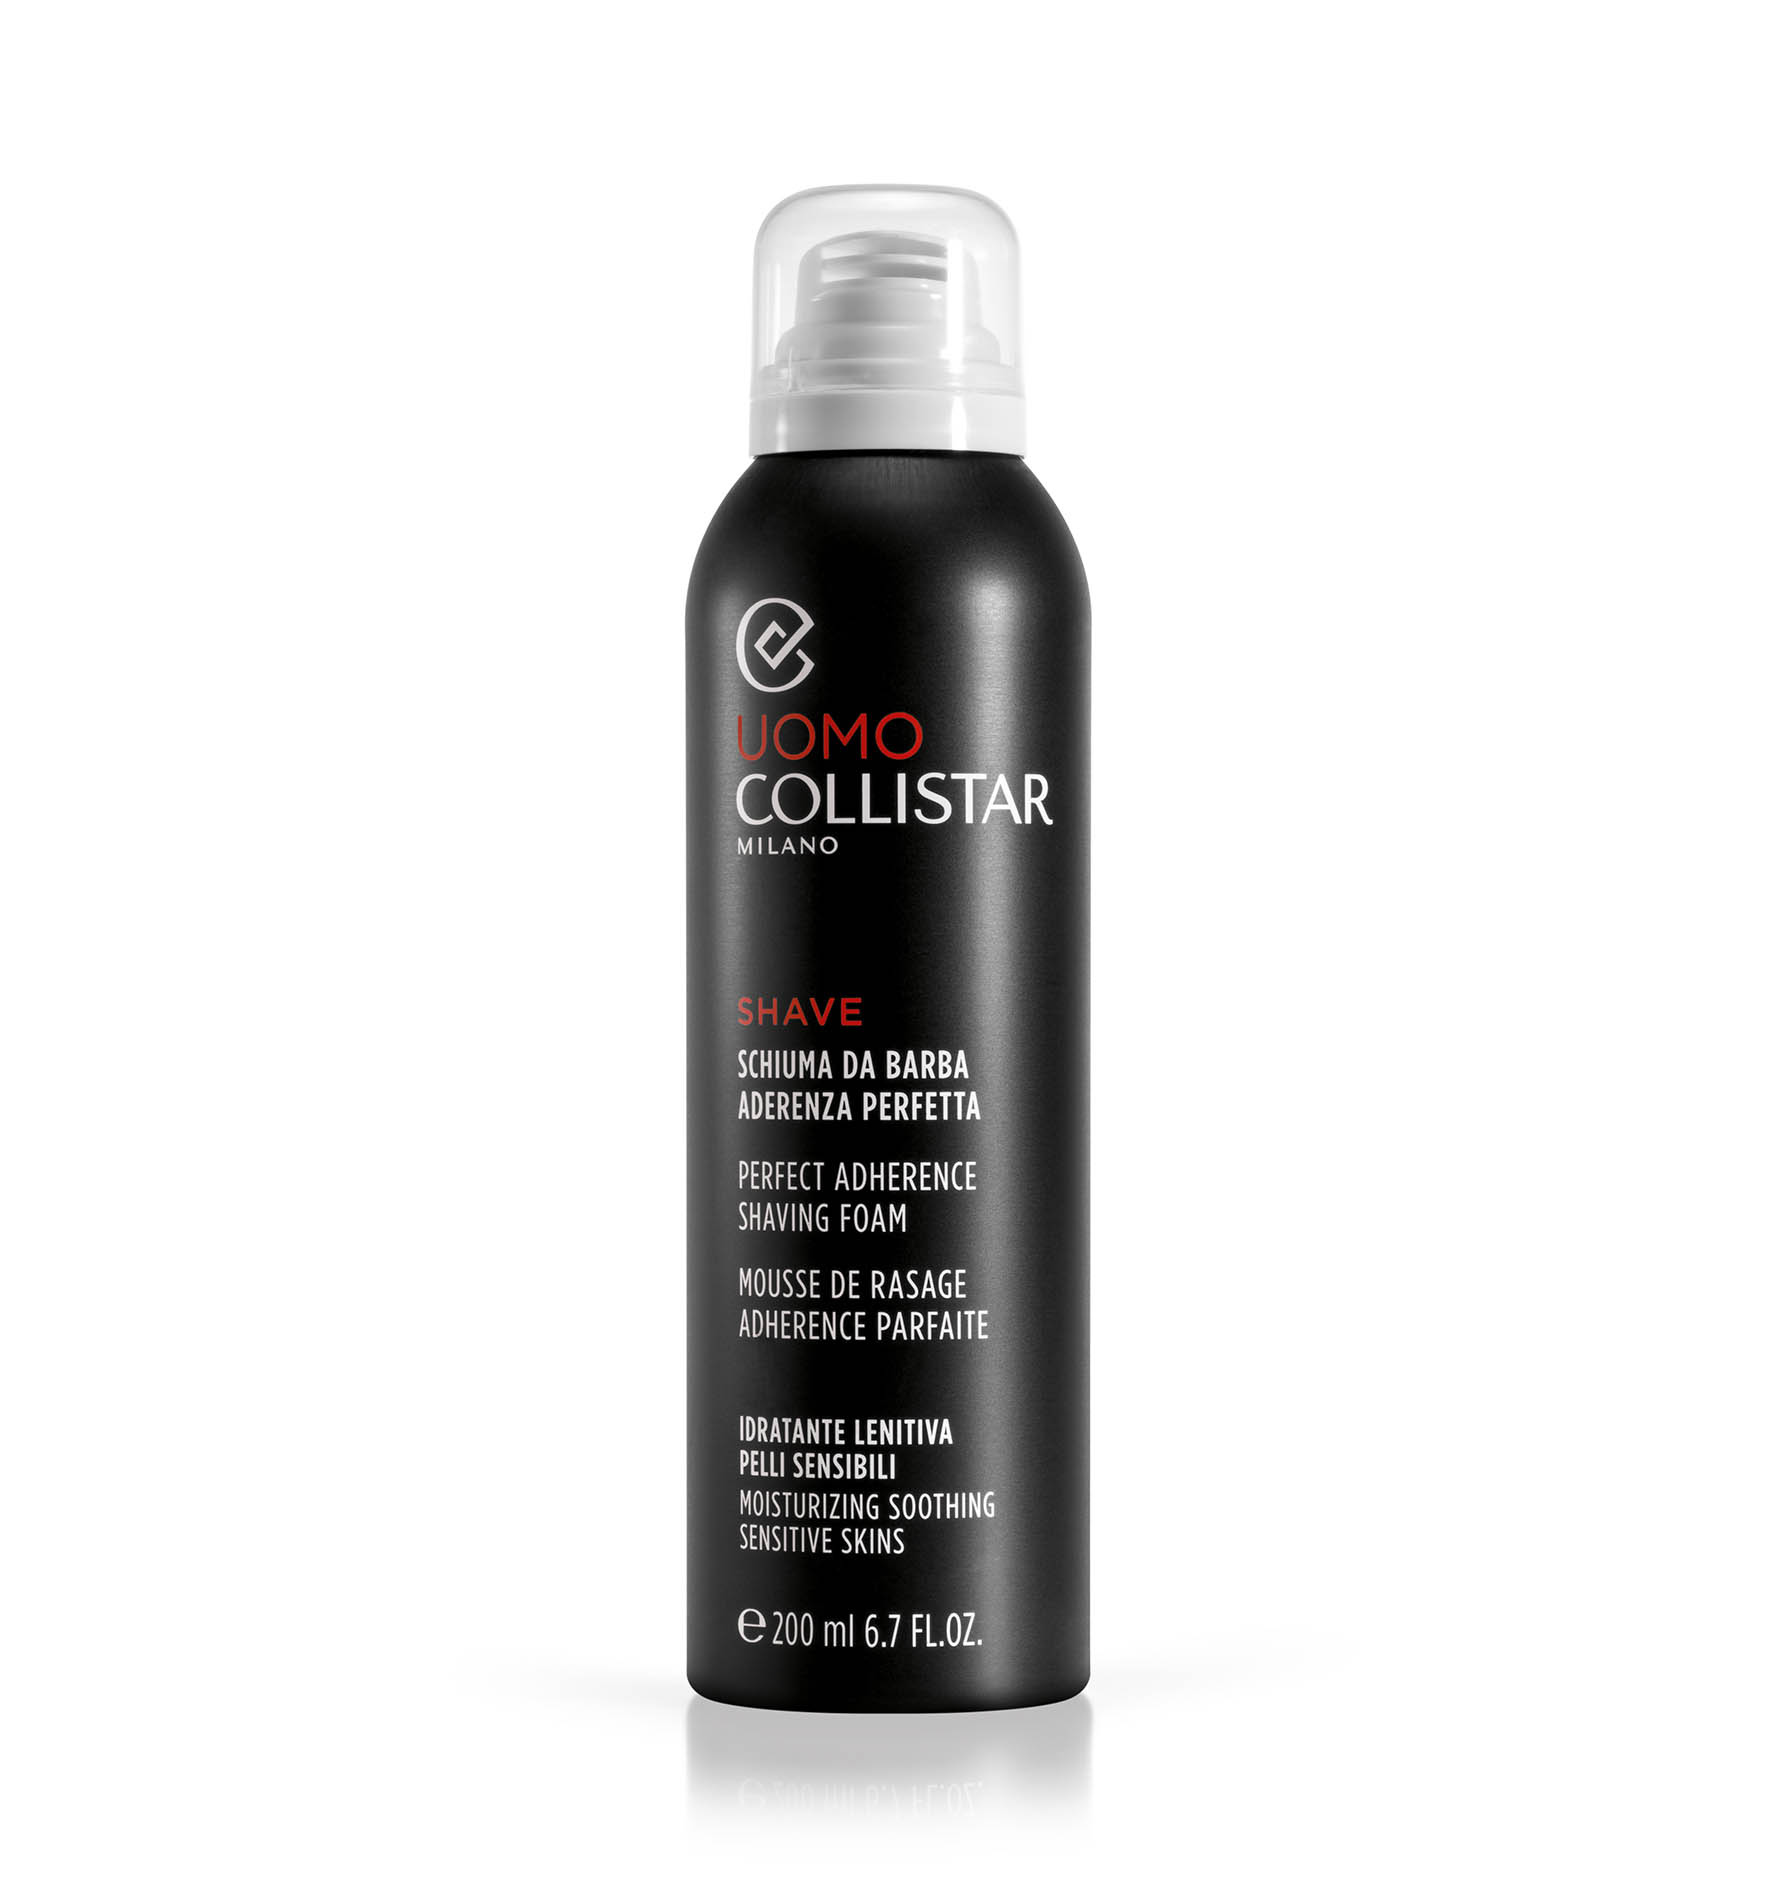 UOMO SHAVE PERFECT ADHERENCE SHAVING FOAM - GIFT IDEAS | Collistar - Shop Online Ufficiale